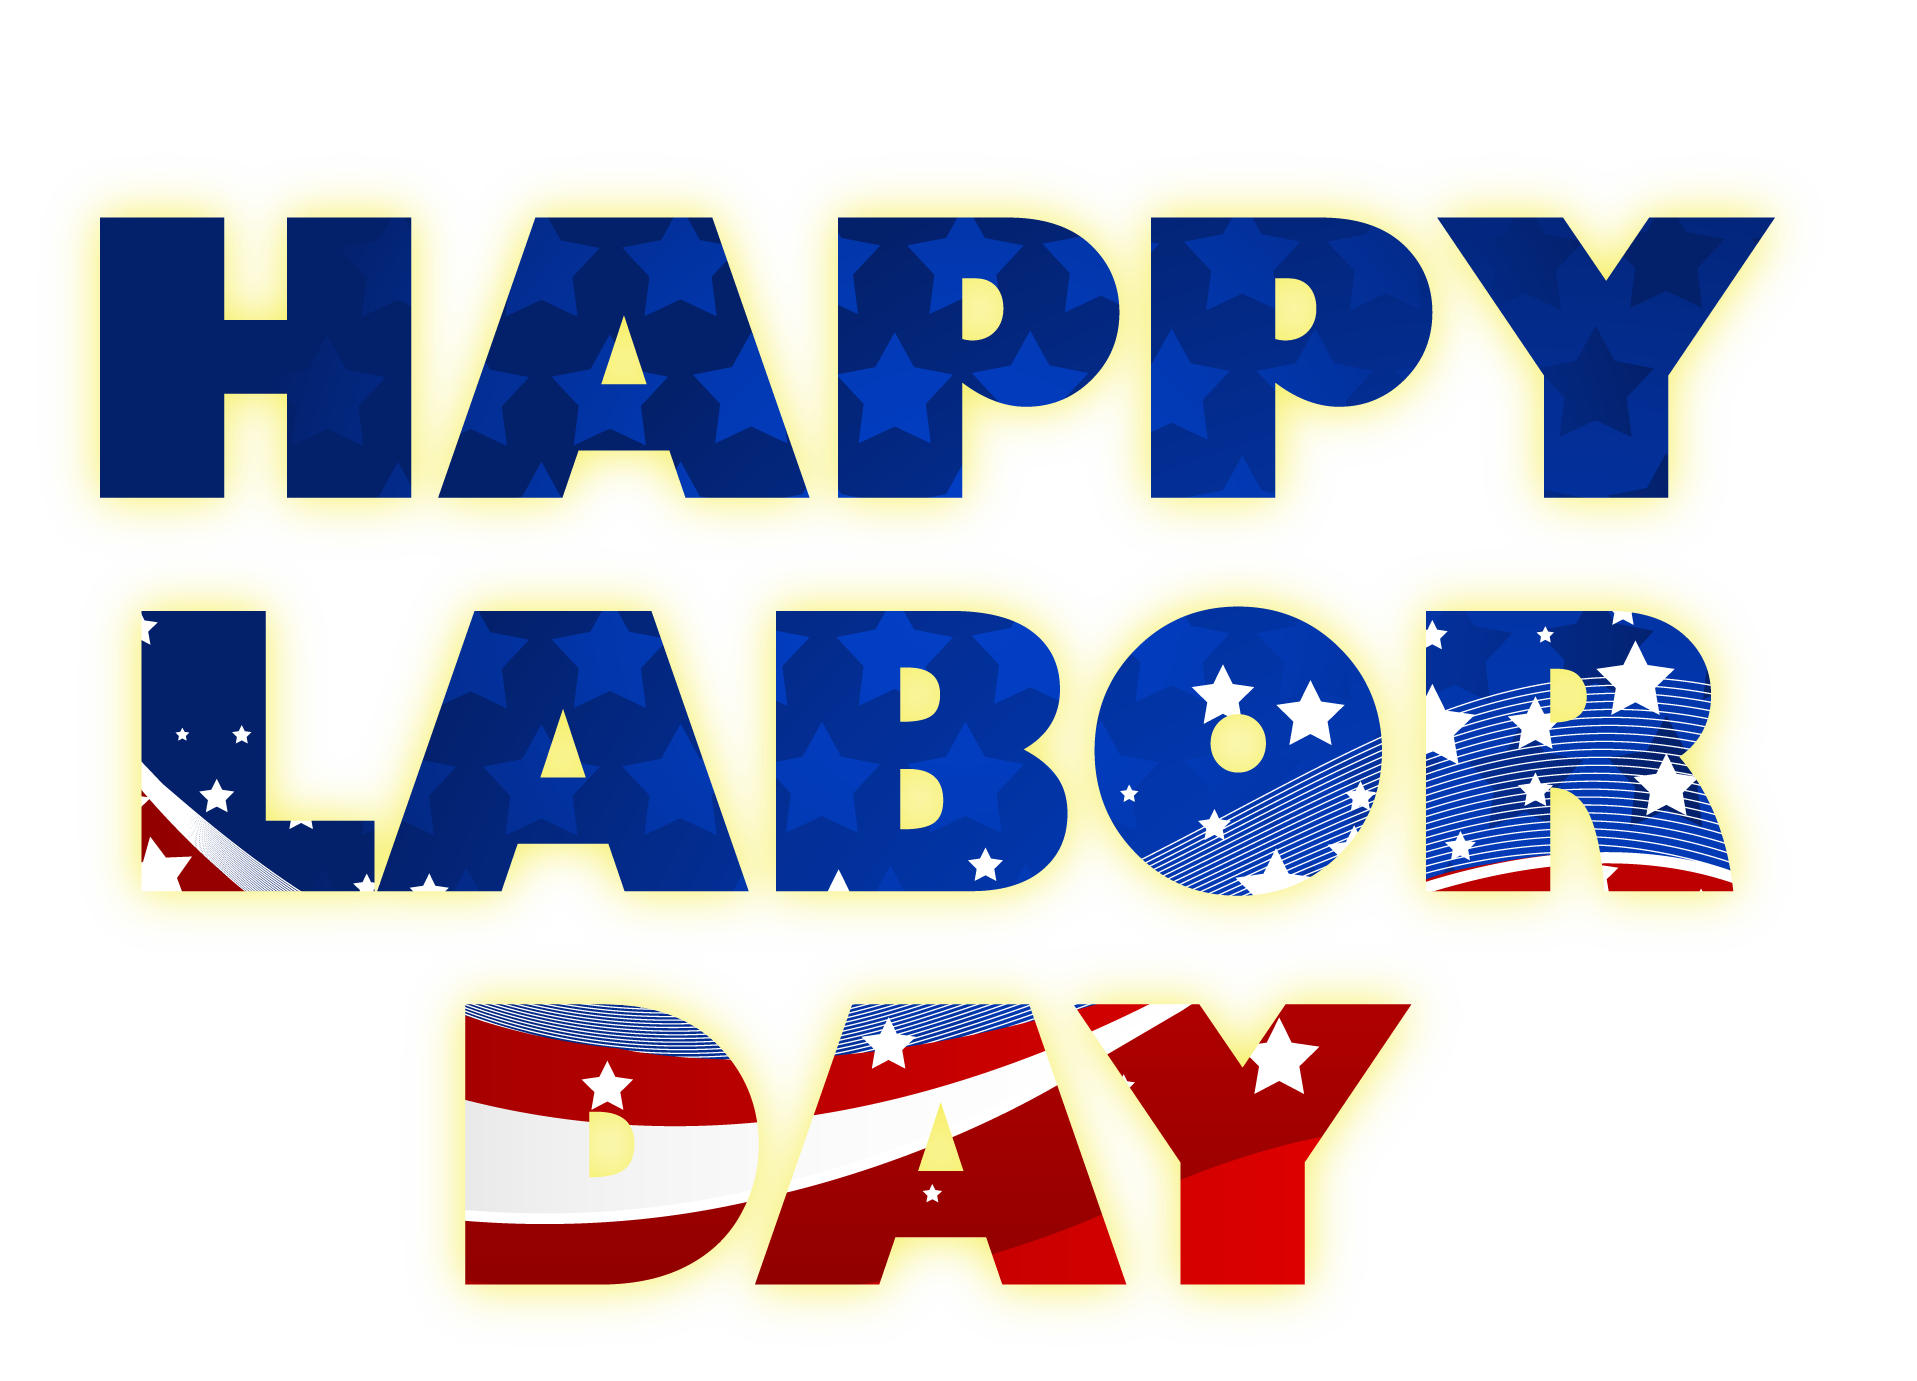 The History of Labor Day in United States